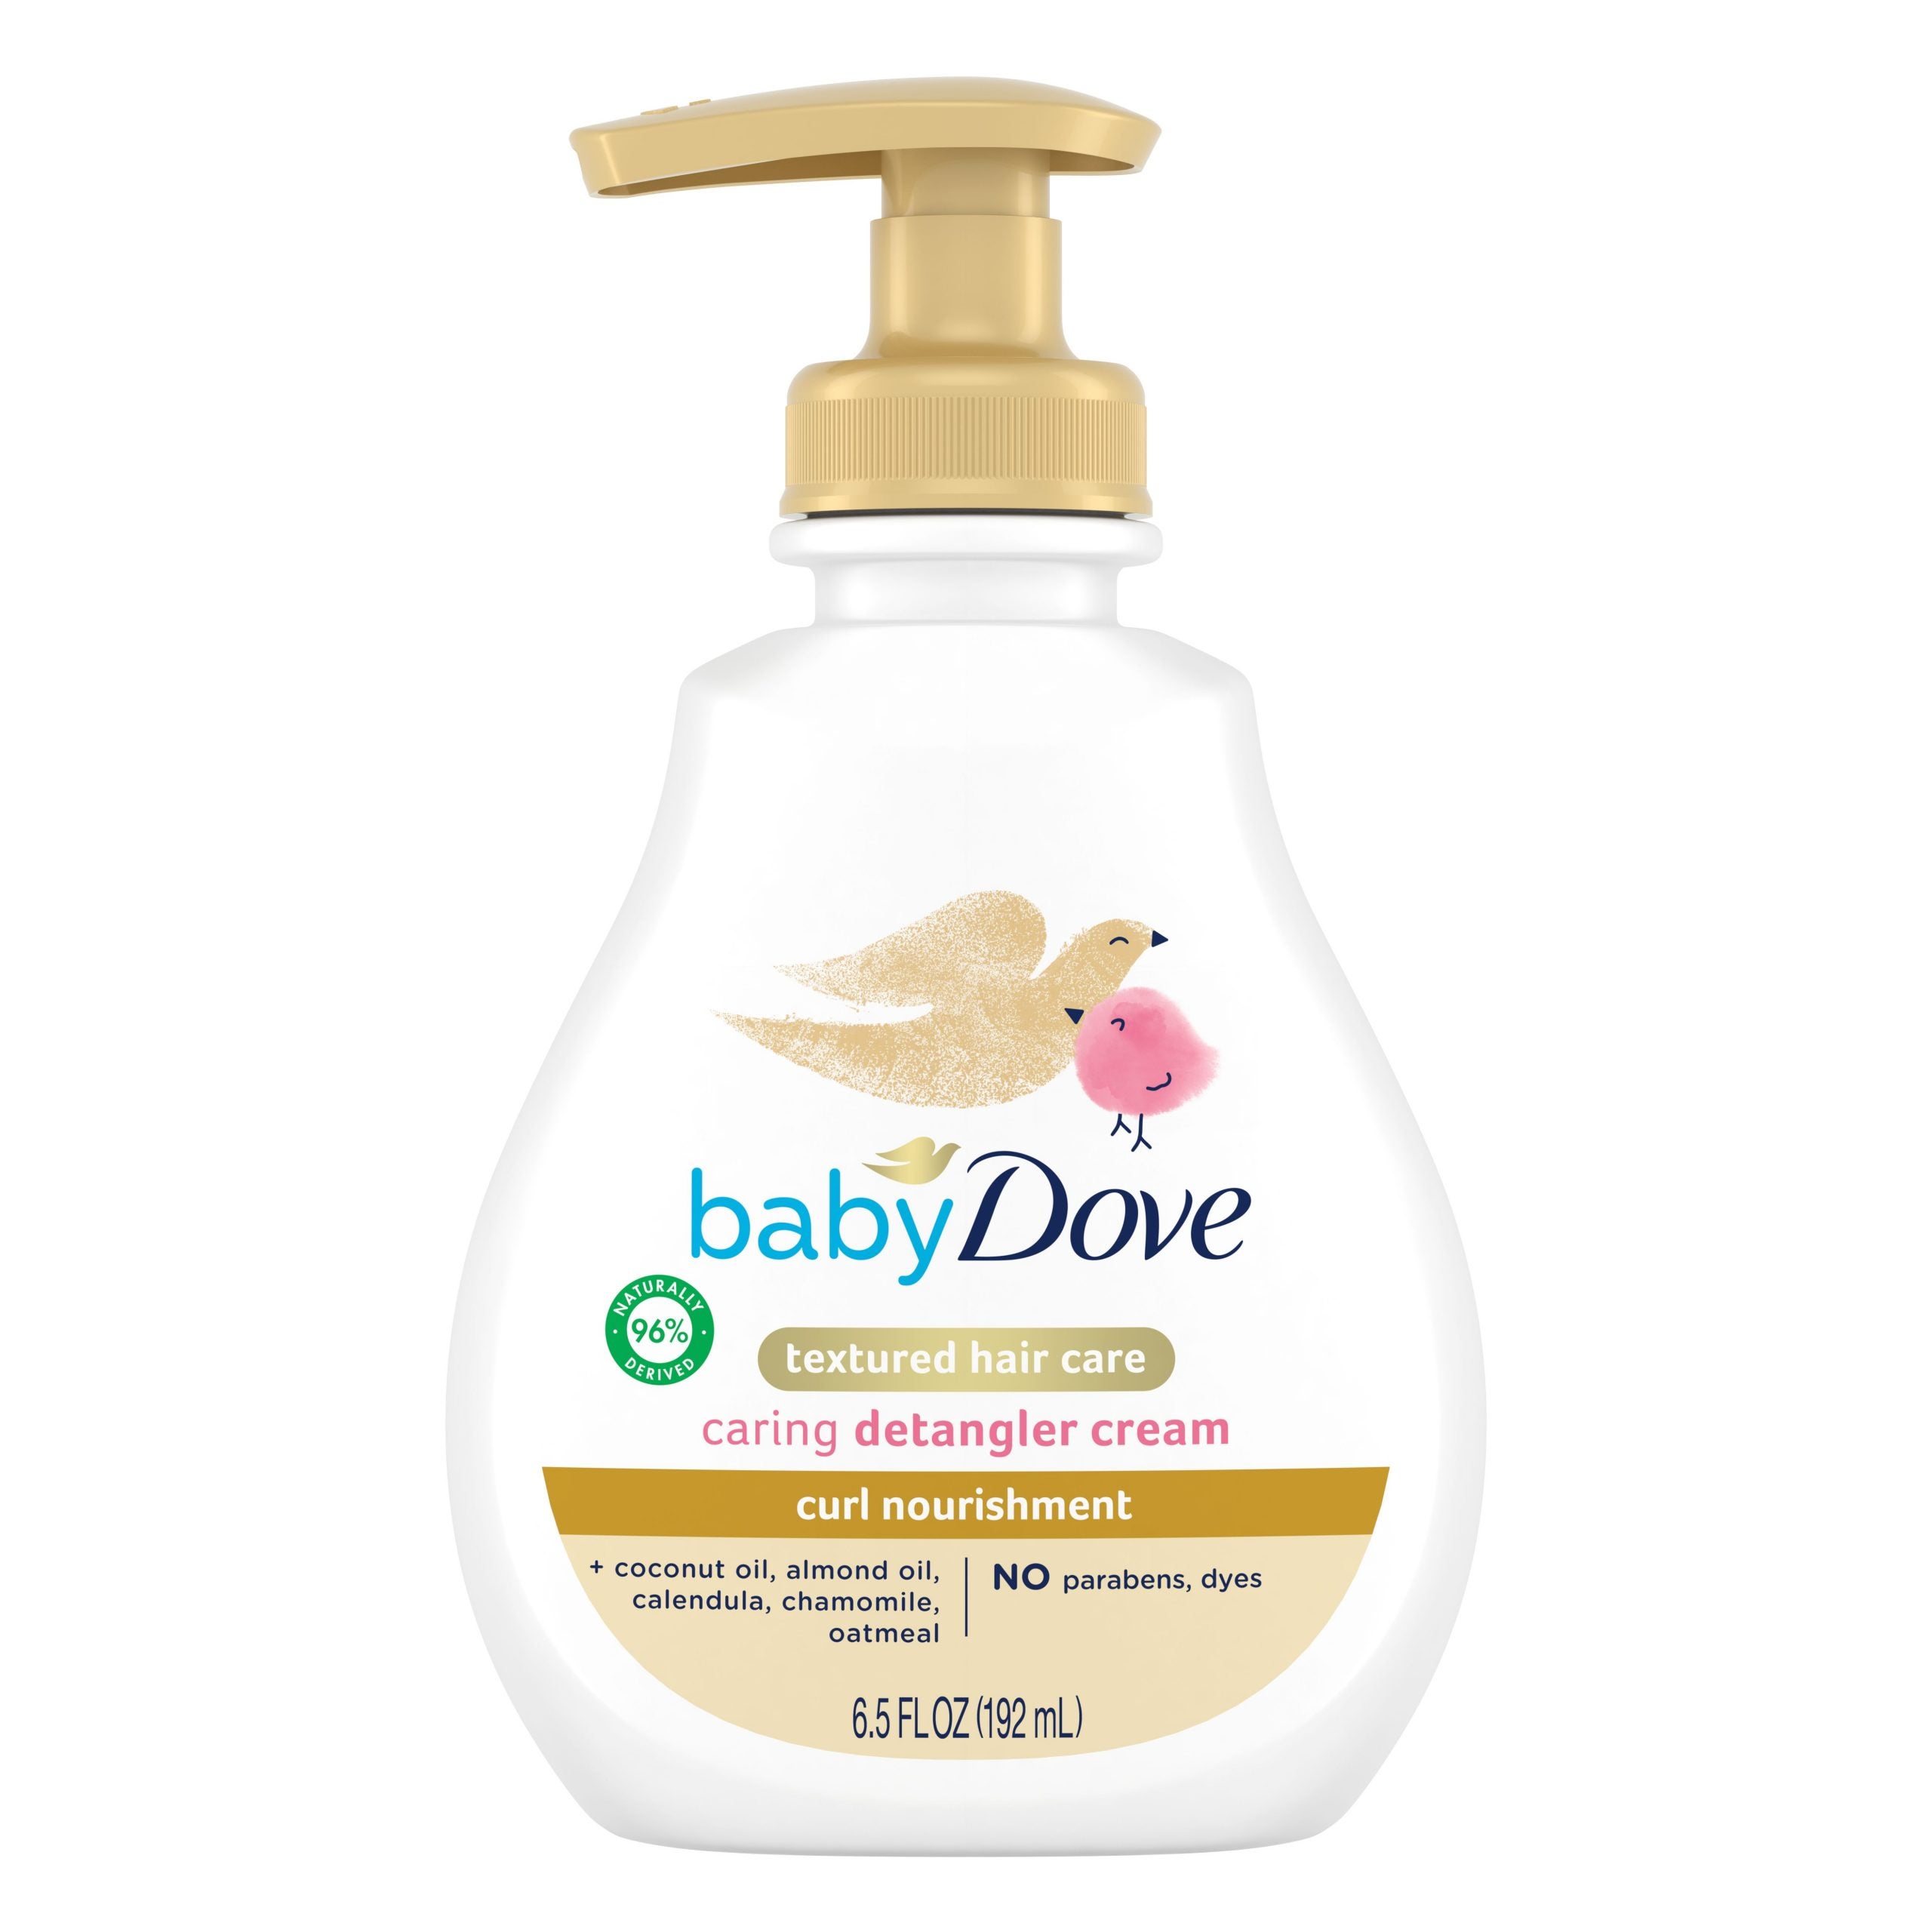 Baby Dove Launches Black Birth Equity Fund To Protect Expectant Moms, "Melanin-Rich" Line To Protect Black Babies